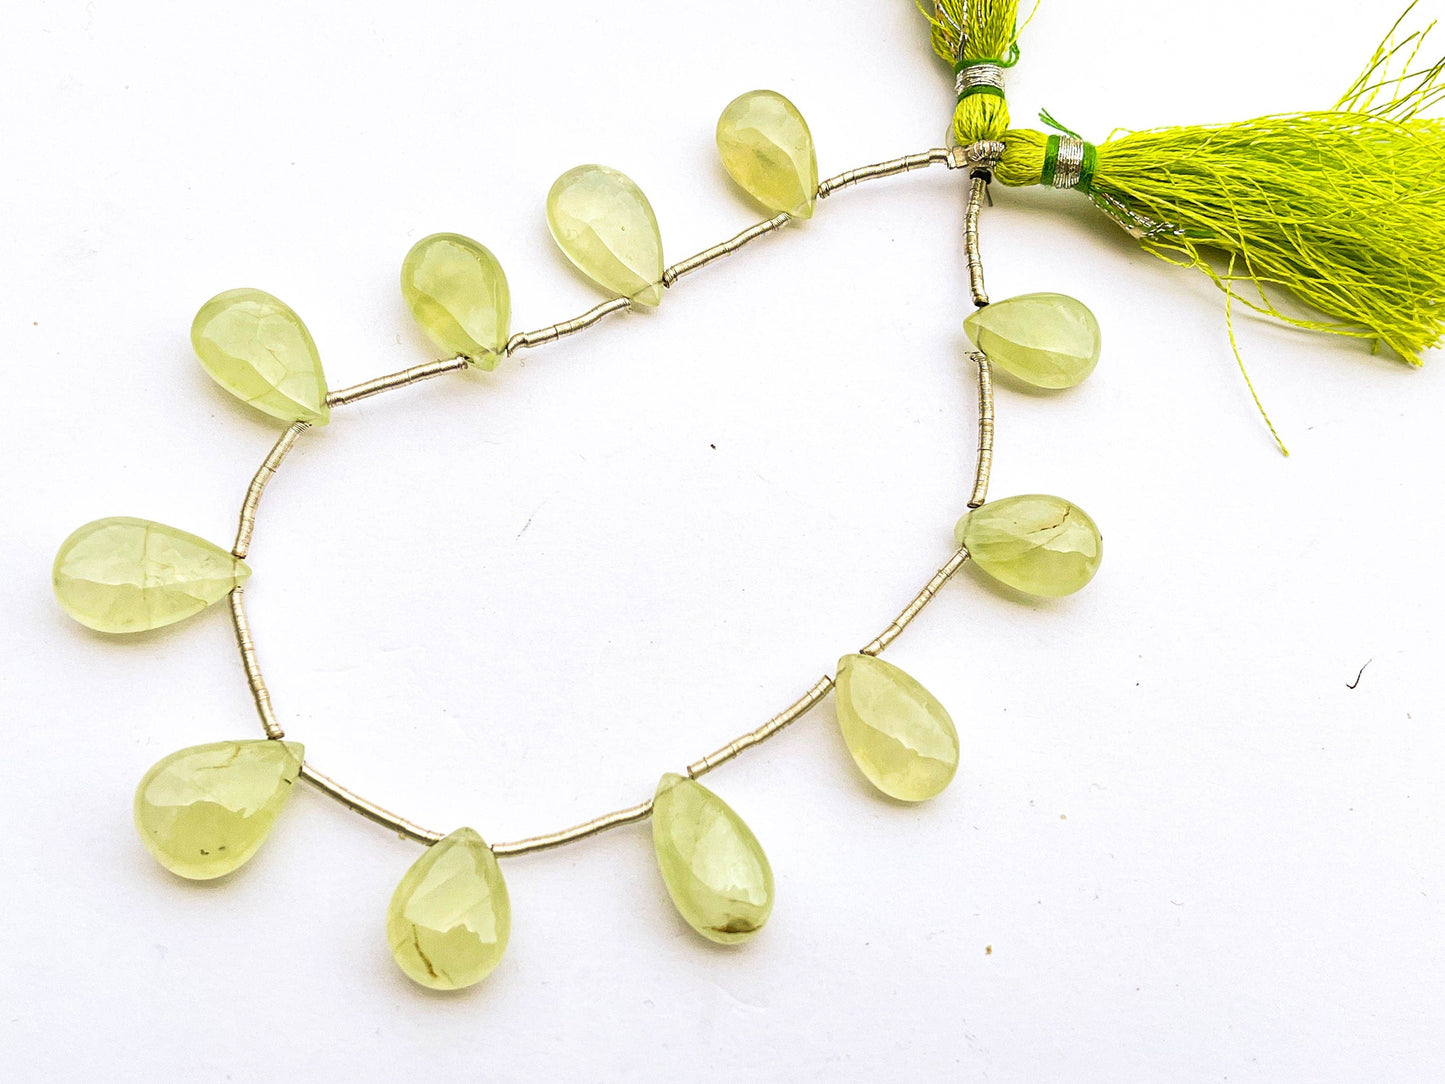 11 pieces PREHNITE Briolette Smooth Pear Shape, Natural Prehnite Pear Briolette, Prehnite Gemstone Beads, 10x15mm to 12x19mm Beadsforyourjewelry